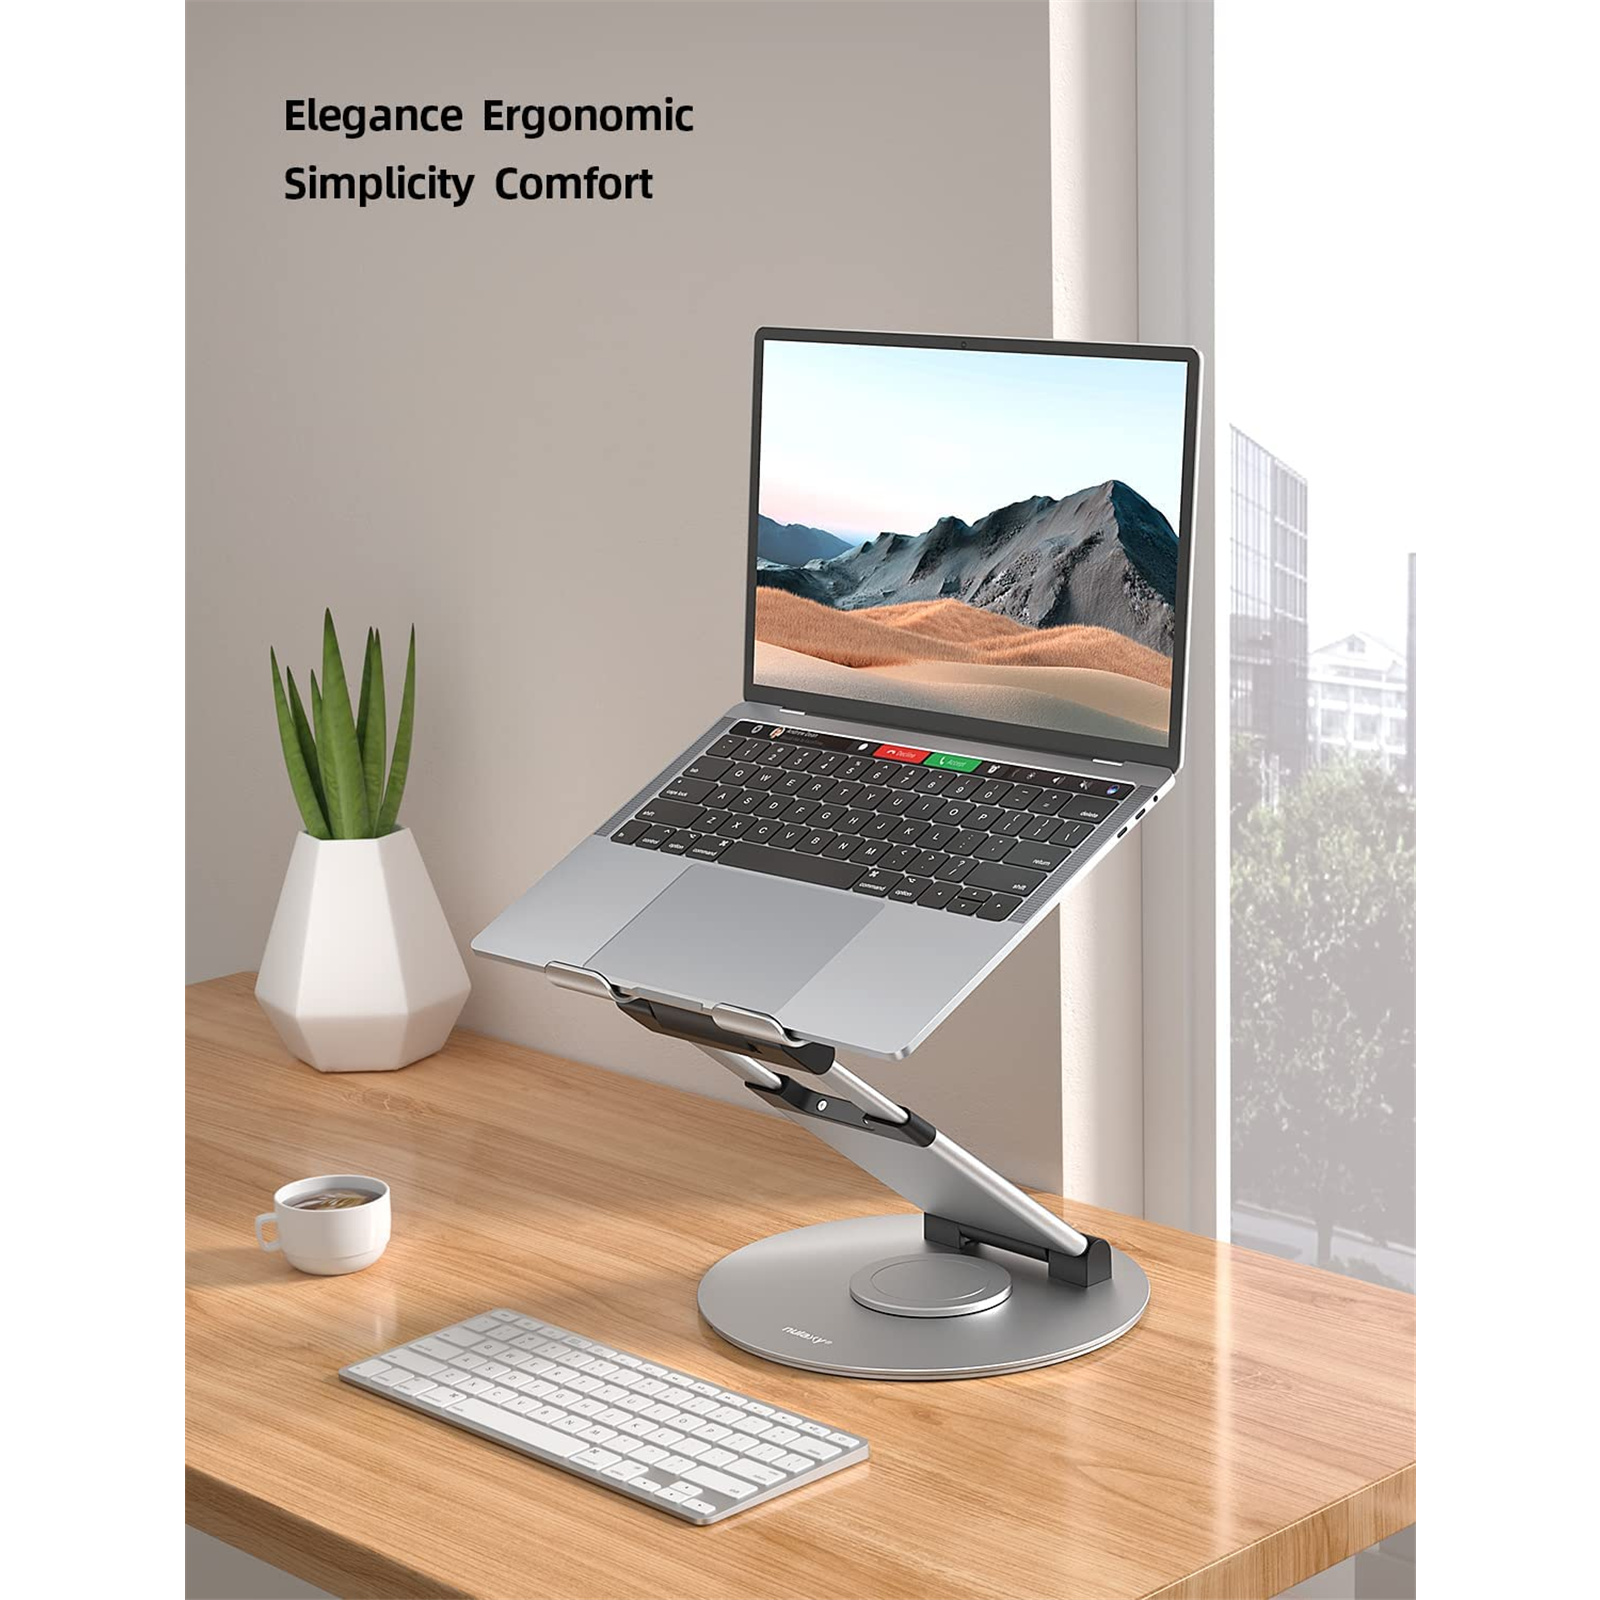 Nulaxy LS18 360° Rotating Laptop Stand Silver For Collaborative Work Compatible with 10 17 Apple MacBook Laptops NZDEPOT 5 - NZ DEPOT